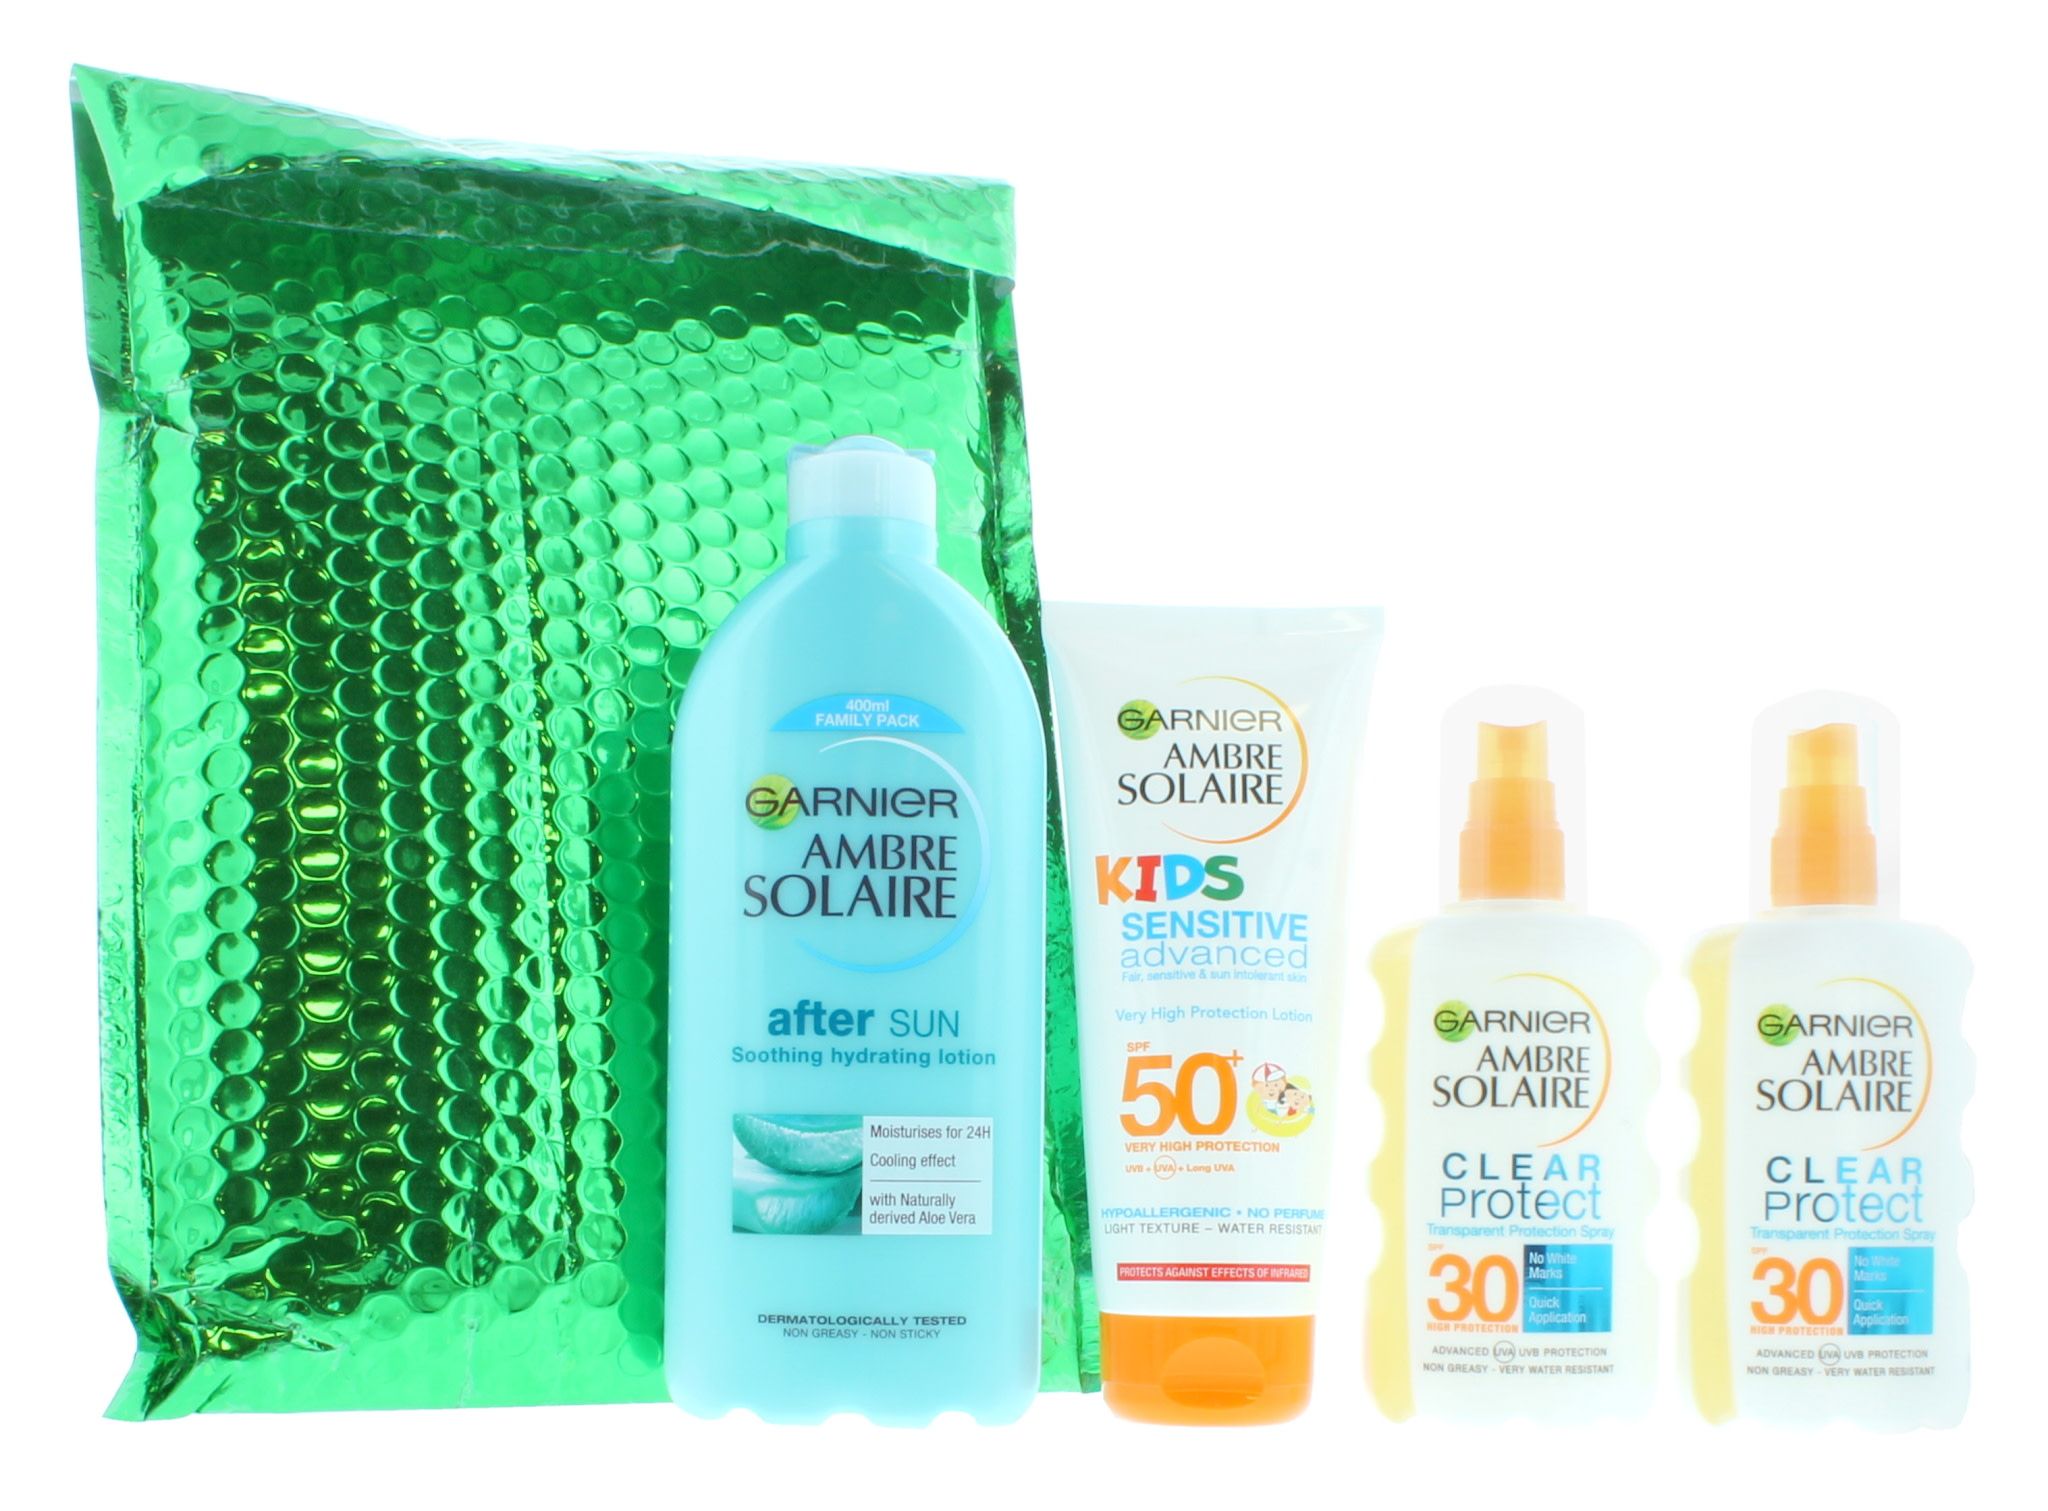 Ambre Solaire Family Sun Care Kit - After Sun + 2 x SPF30 and Kids SPF50. Clear Protect Sun Cream Spray - This high protection, transparent formula leaves no white marks. Non-greasy, water-resistant. Sensitive Enhanced Kids Lotion - This very high protection SPF50+ lotion is specially developed for childrens’ delicate and sensitive skin; hypoallergenic, no perfumes or colourants. Family Size After Sun Lotion - Garnier after sun is enriched with naturally derived Aloe Vera; the formula provides 24 hours hydration and soothes and nourishes skin. All of Garnier sun protection products contain UVA and UVB protection and is tested under paediatric control. Garnier’s research into sun protection is recognised by the British skin foundation.